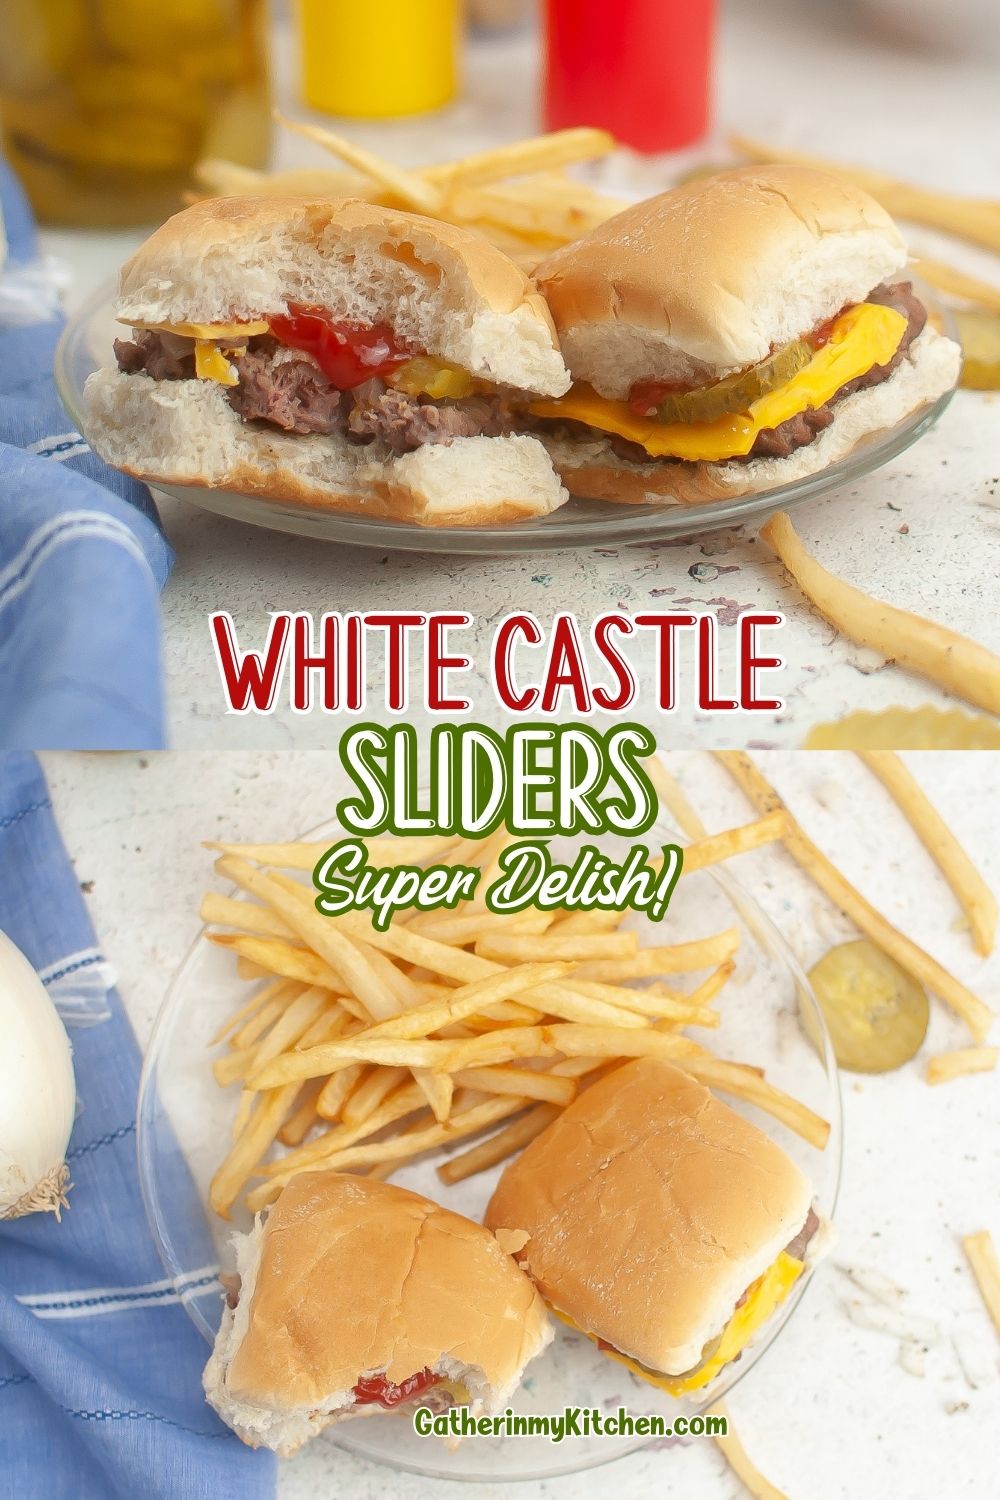 Pin image: top and bottom pics of copycat White Castle Sliders and middle says "White Castle Sliders: Super Delish!".